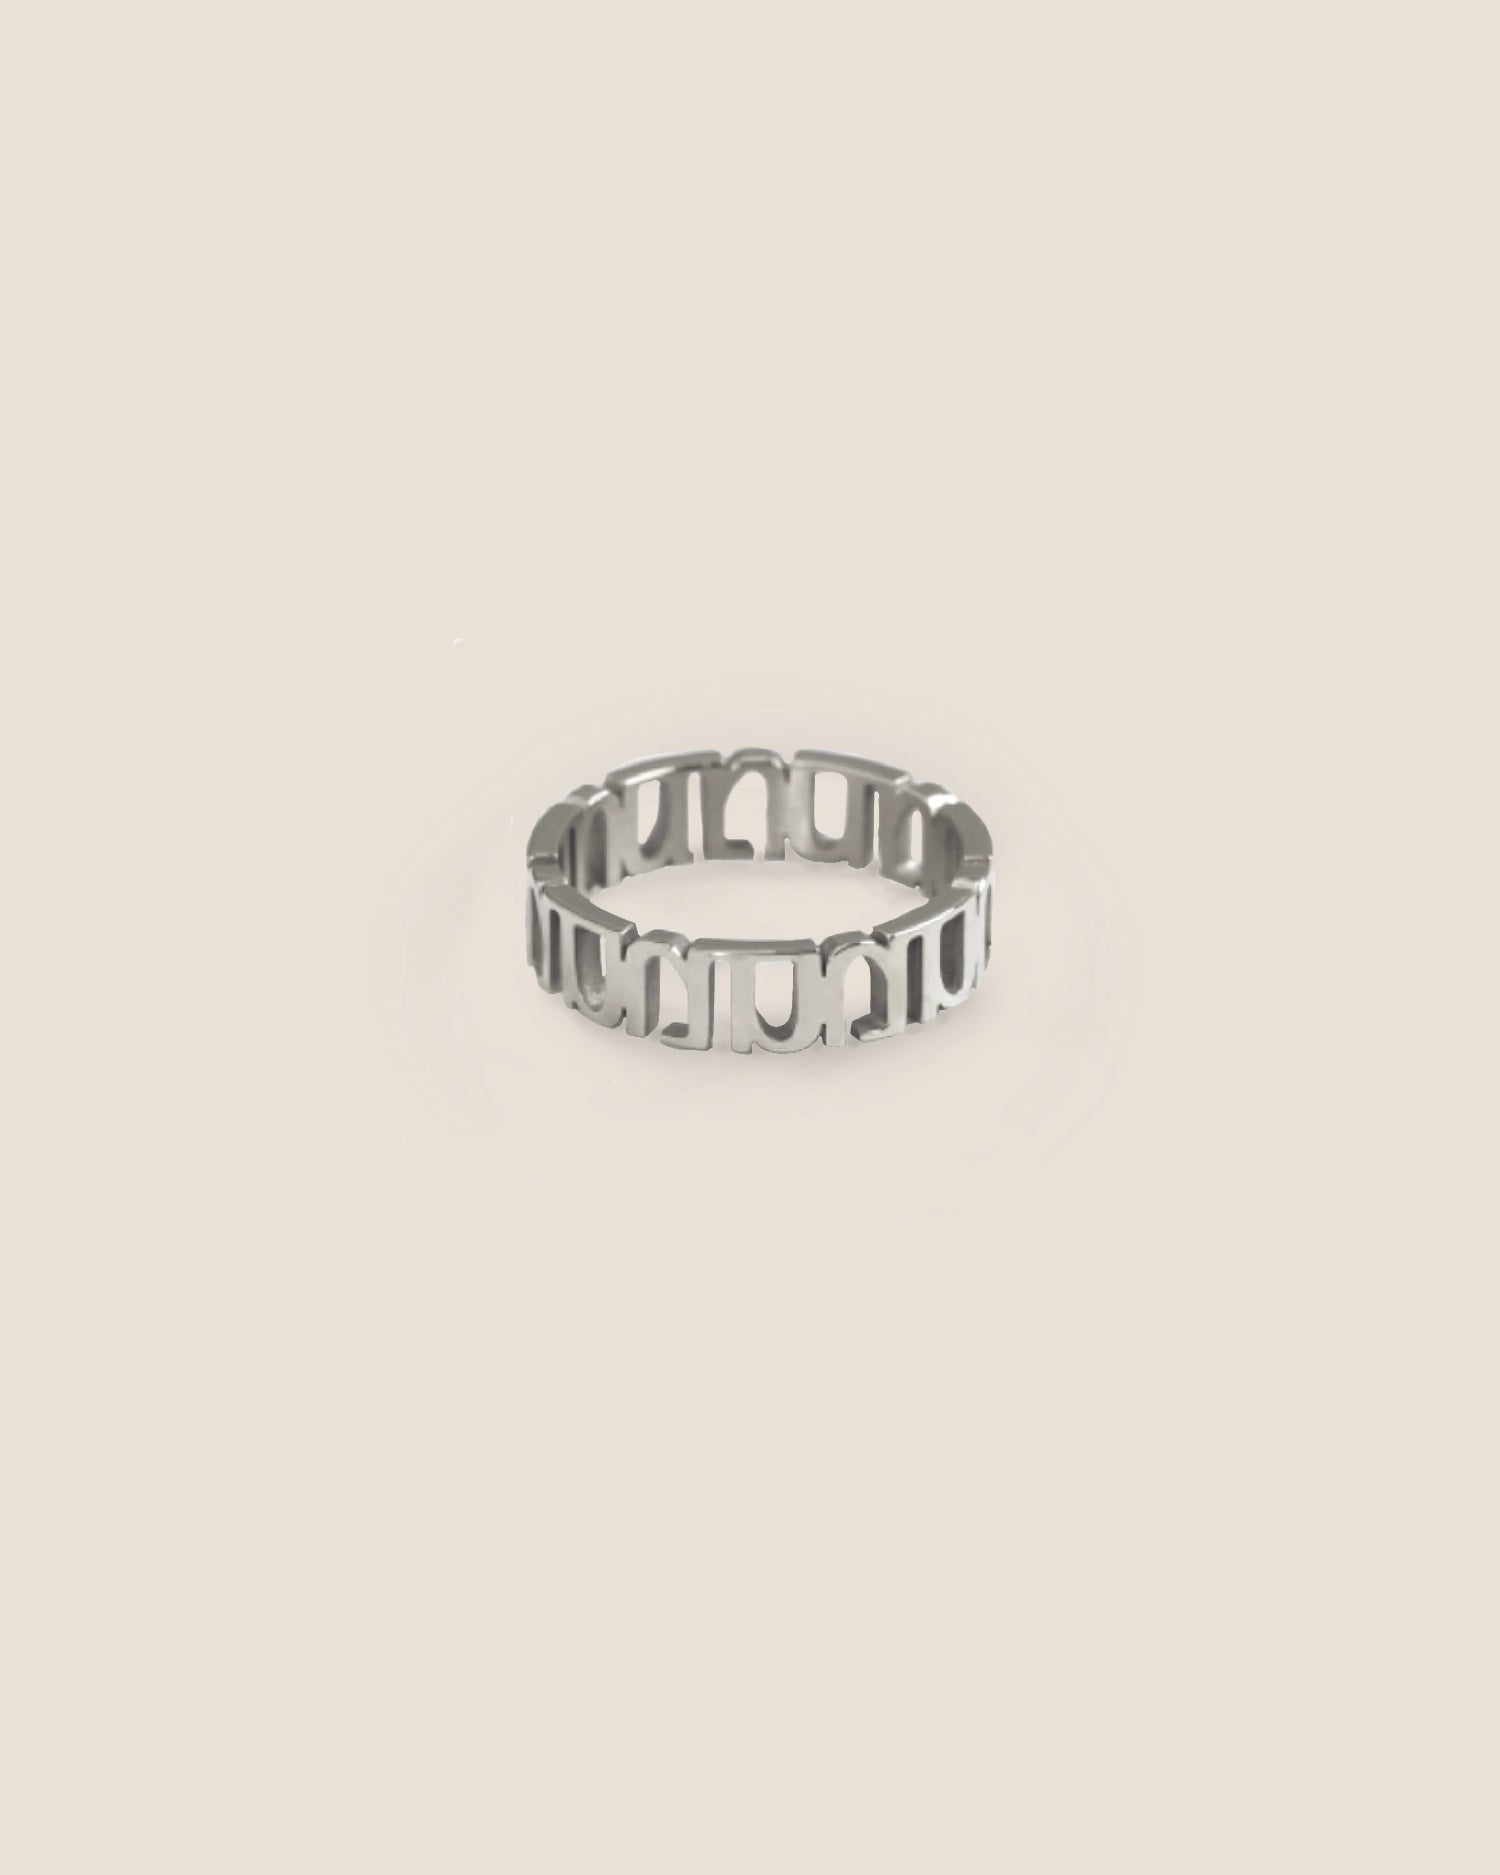 Gung Iconic Silver Ring